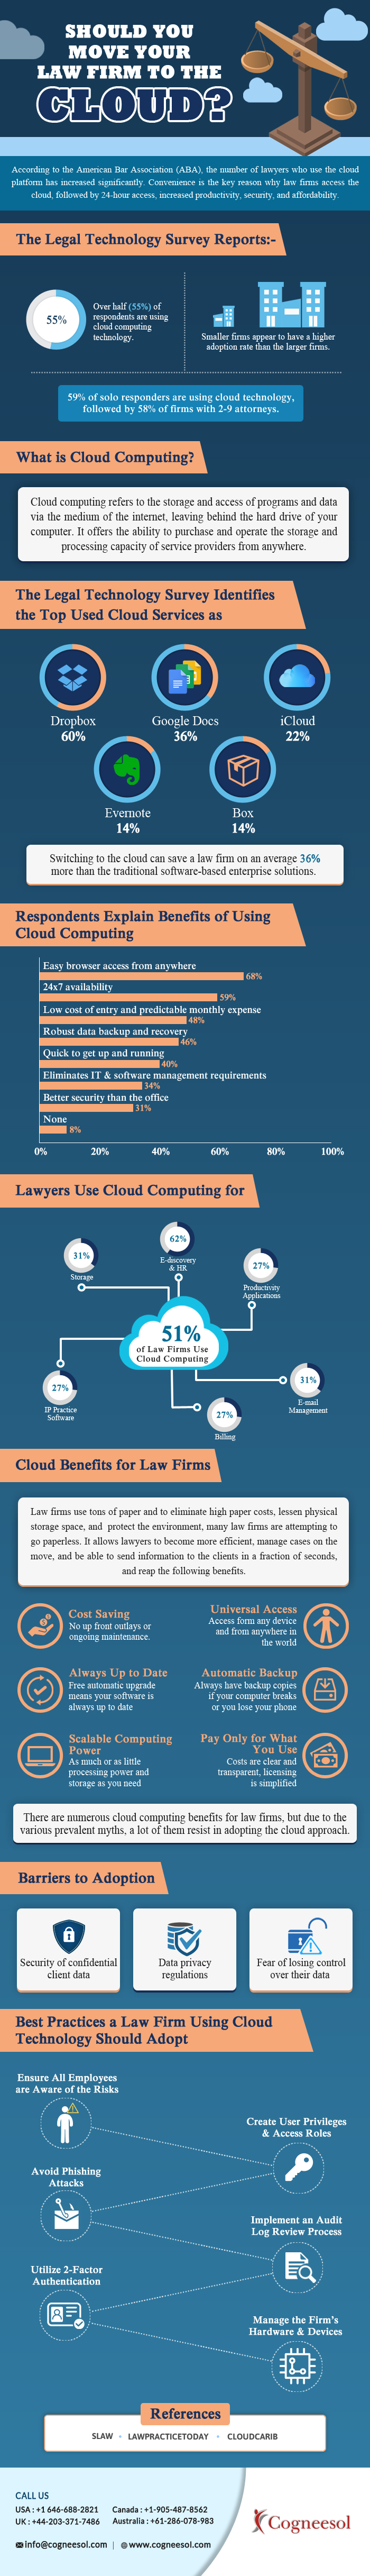 role of cloud technology in law firms